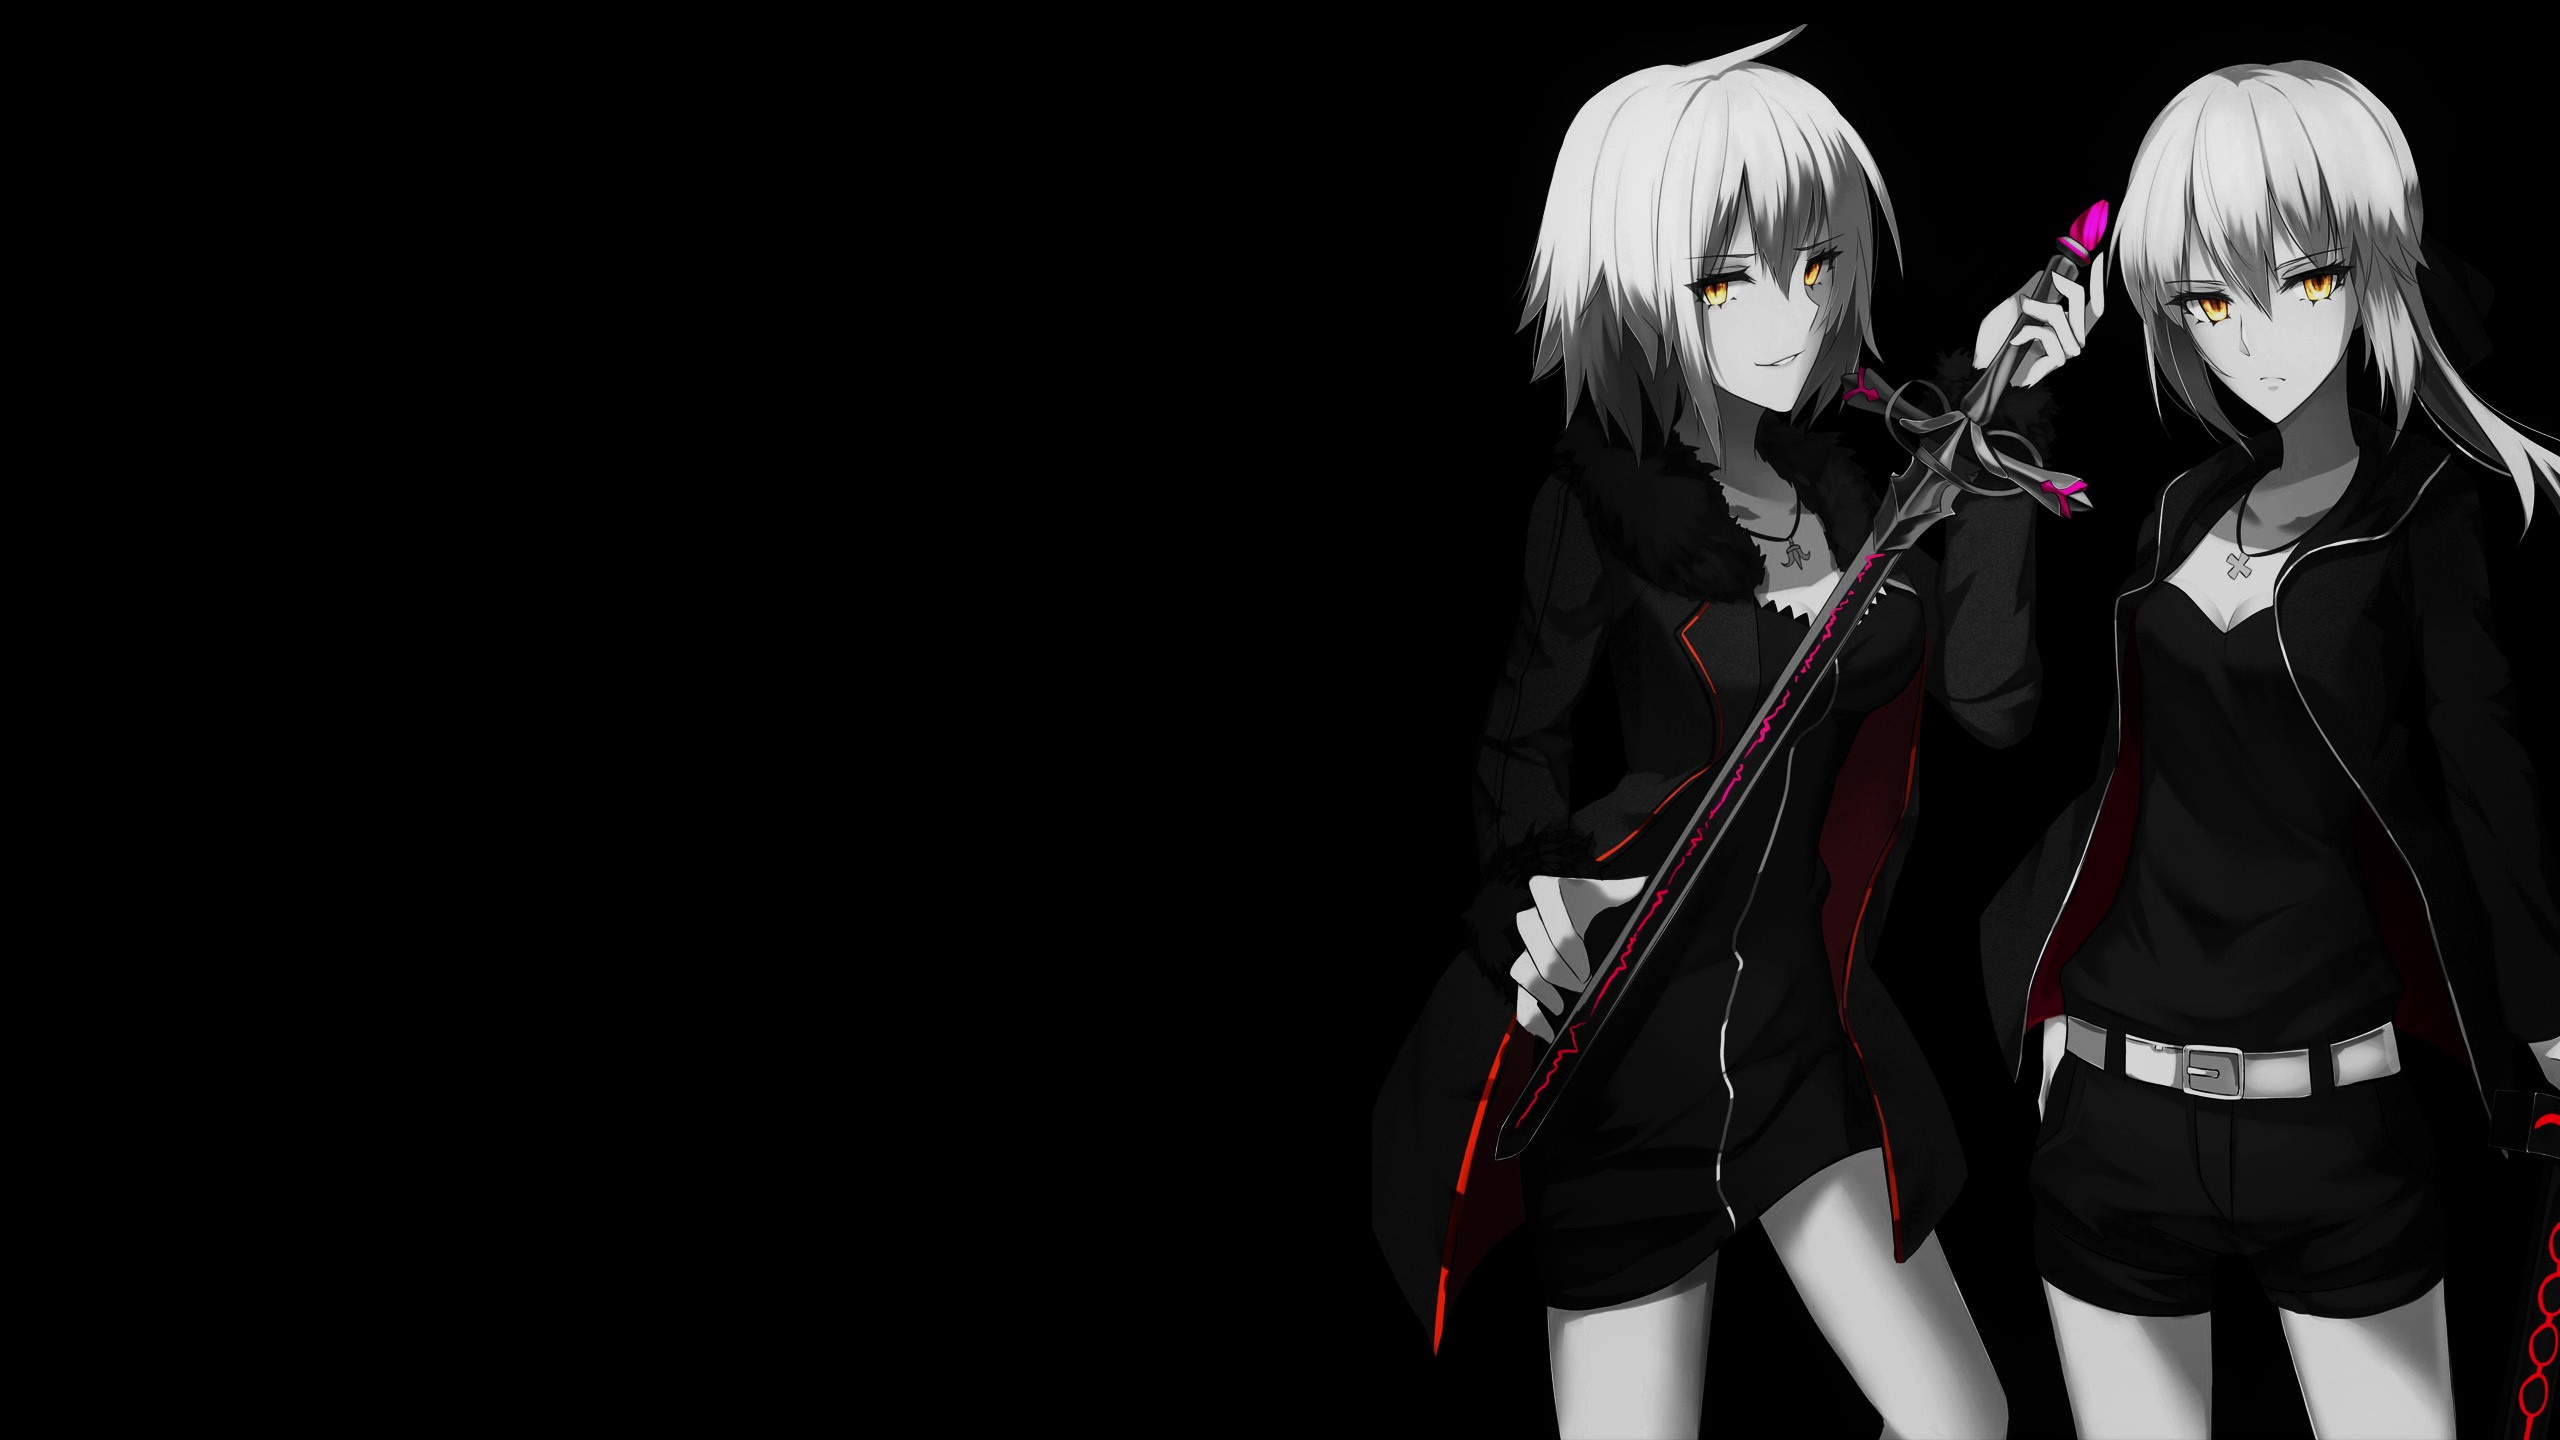 Simple Background Dark Background Black Background Anime Girls Selective Coloring Two Women Sword Fa 2560x1440